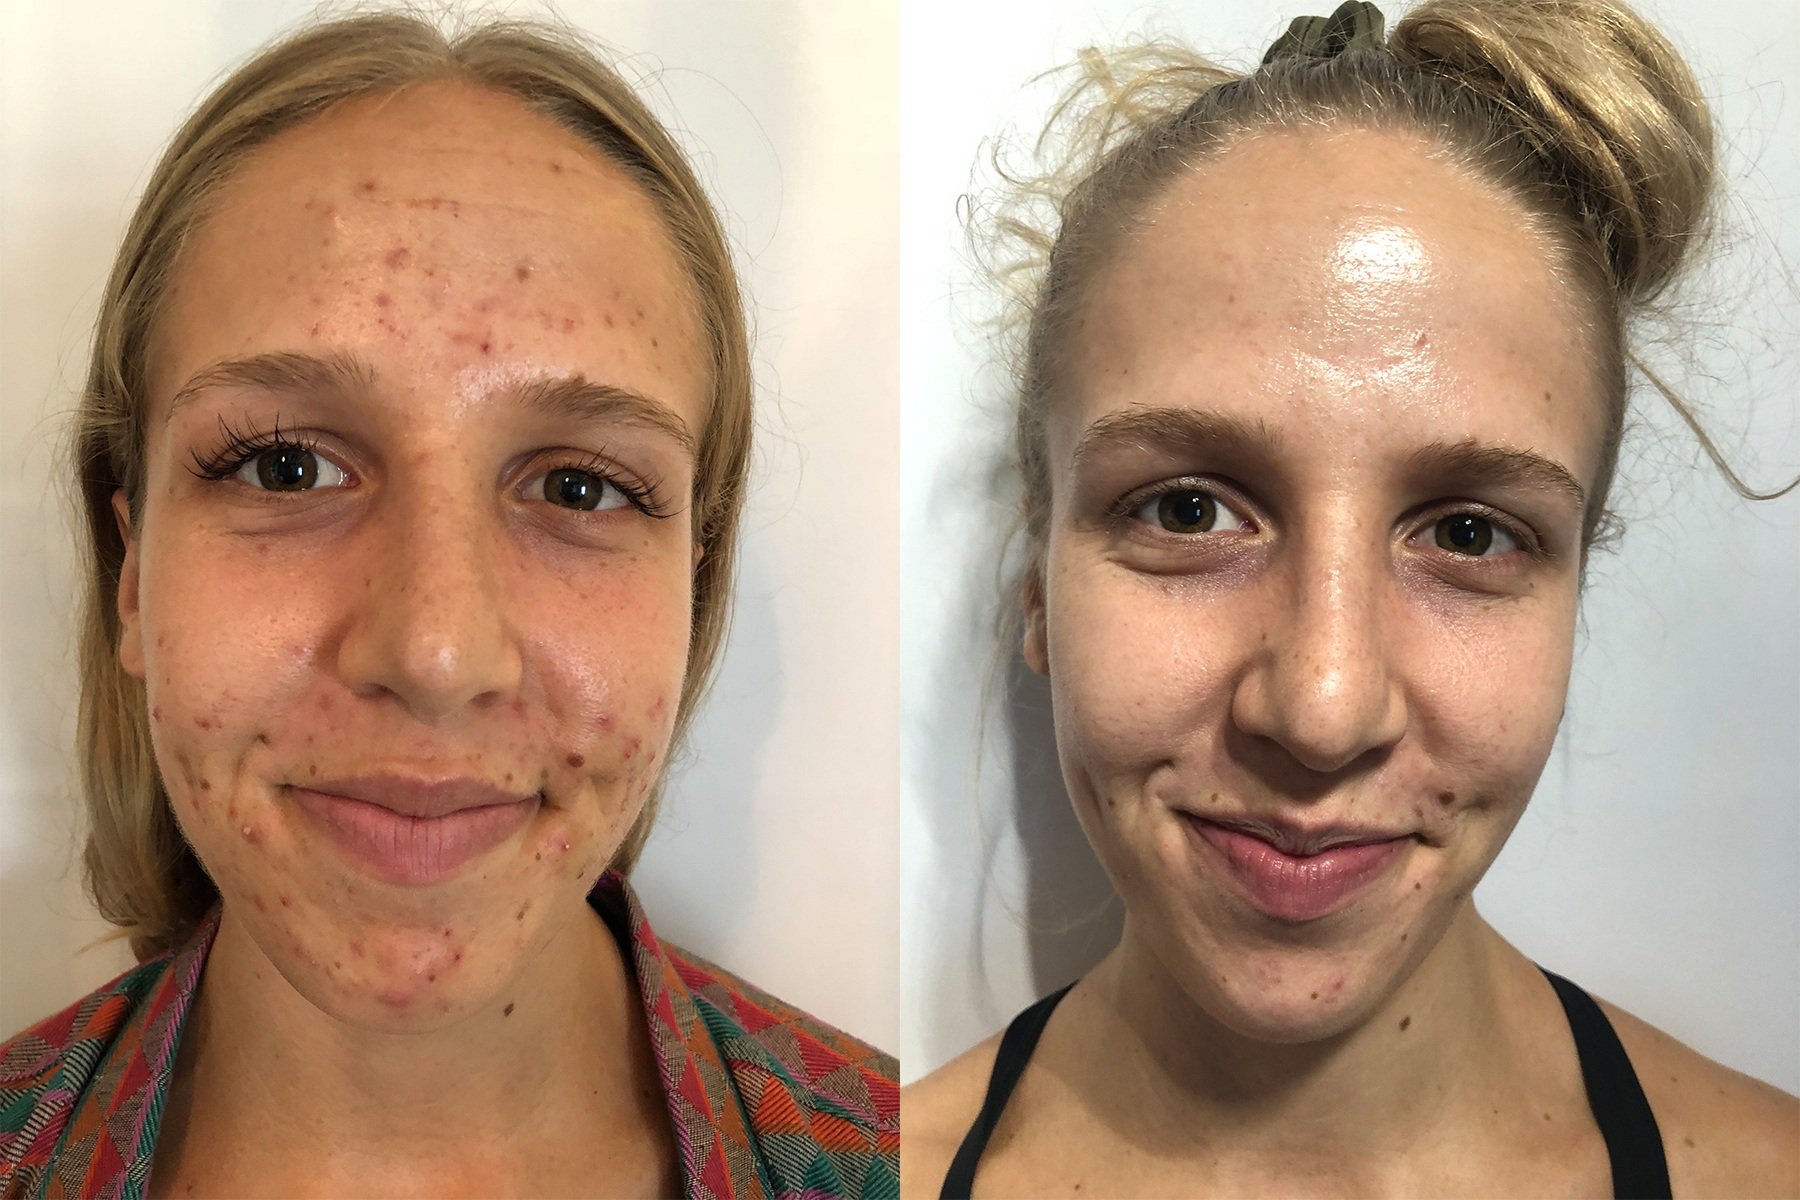 ACNE INFLAMMATION AND SCARRING